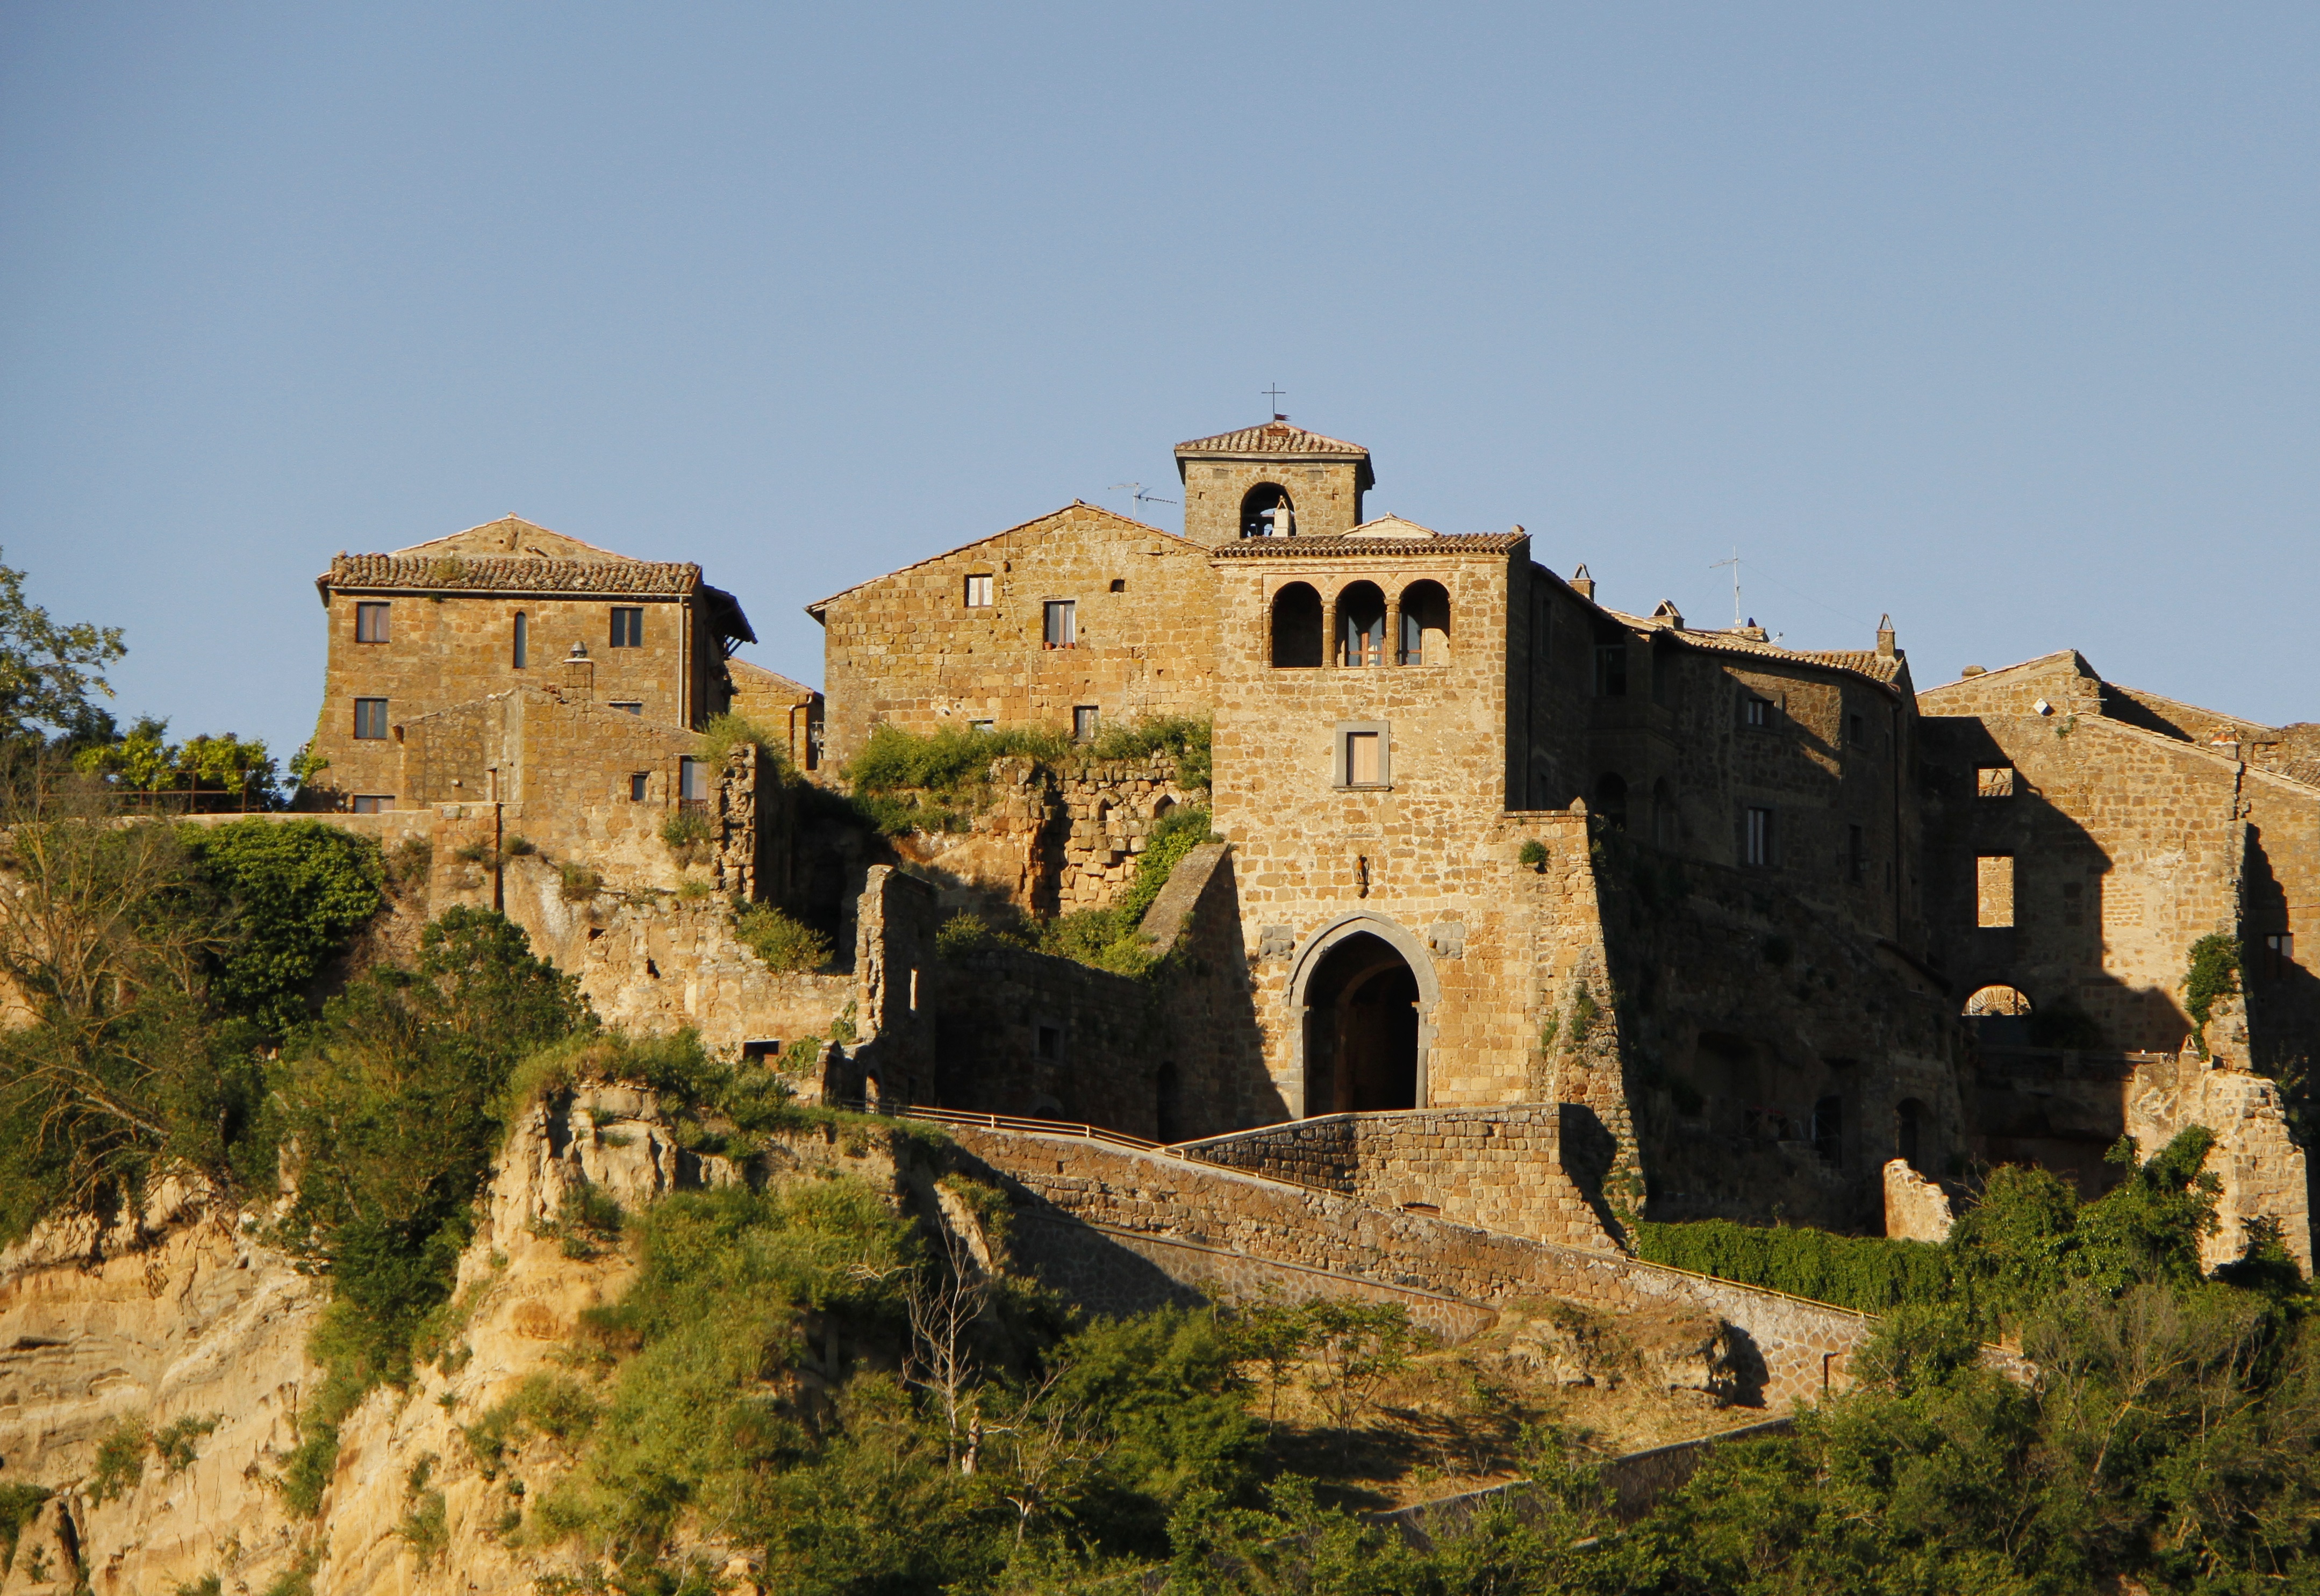 Our Two Nights Civita Bagnoregio Places That Speak Mary Jane